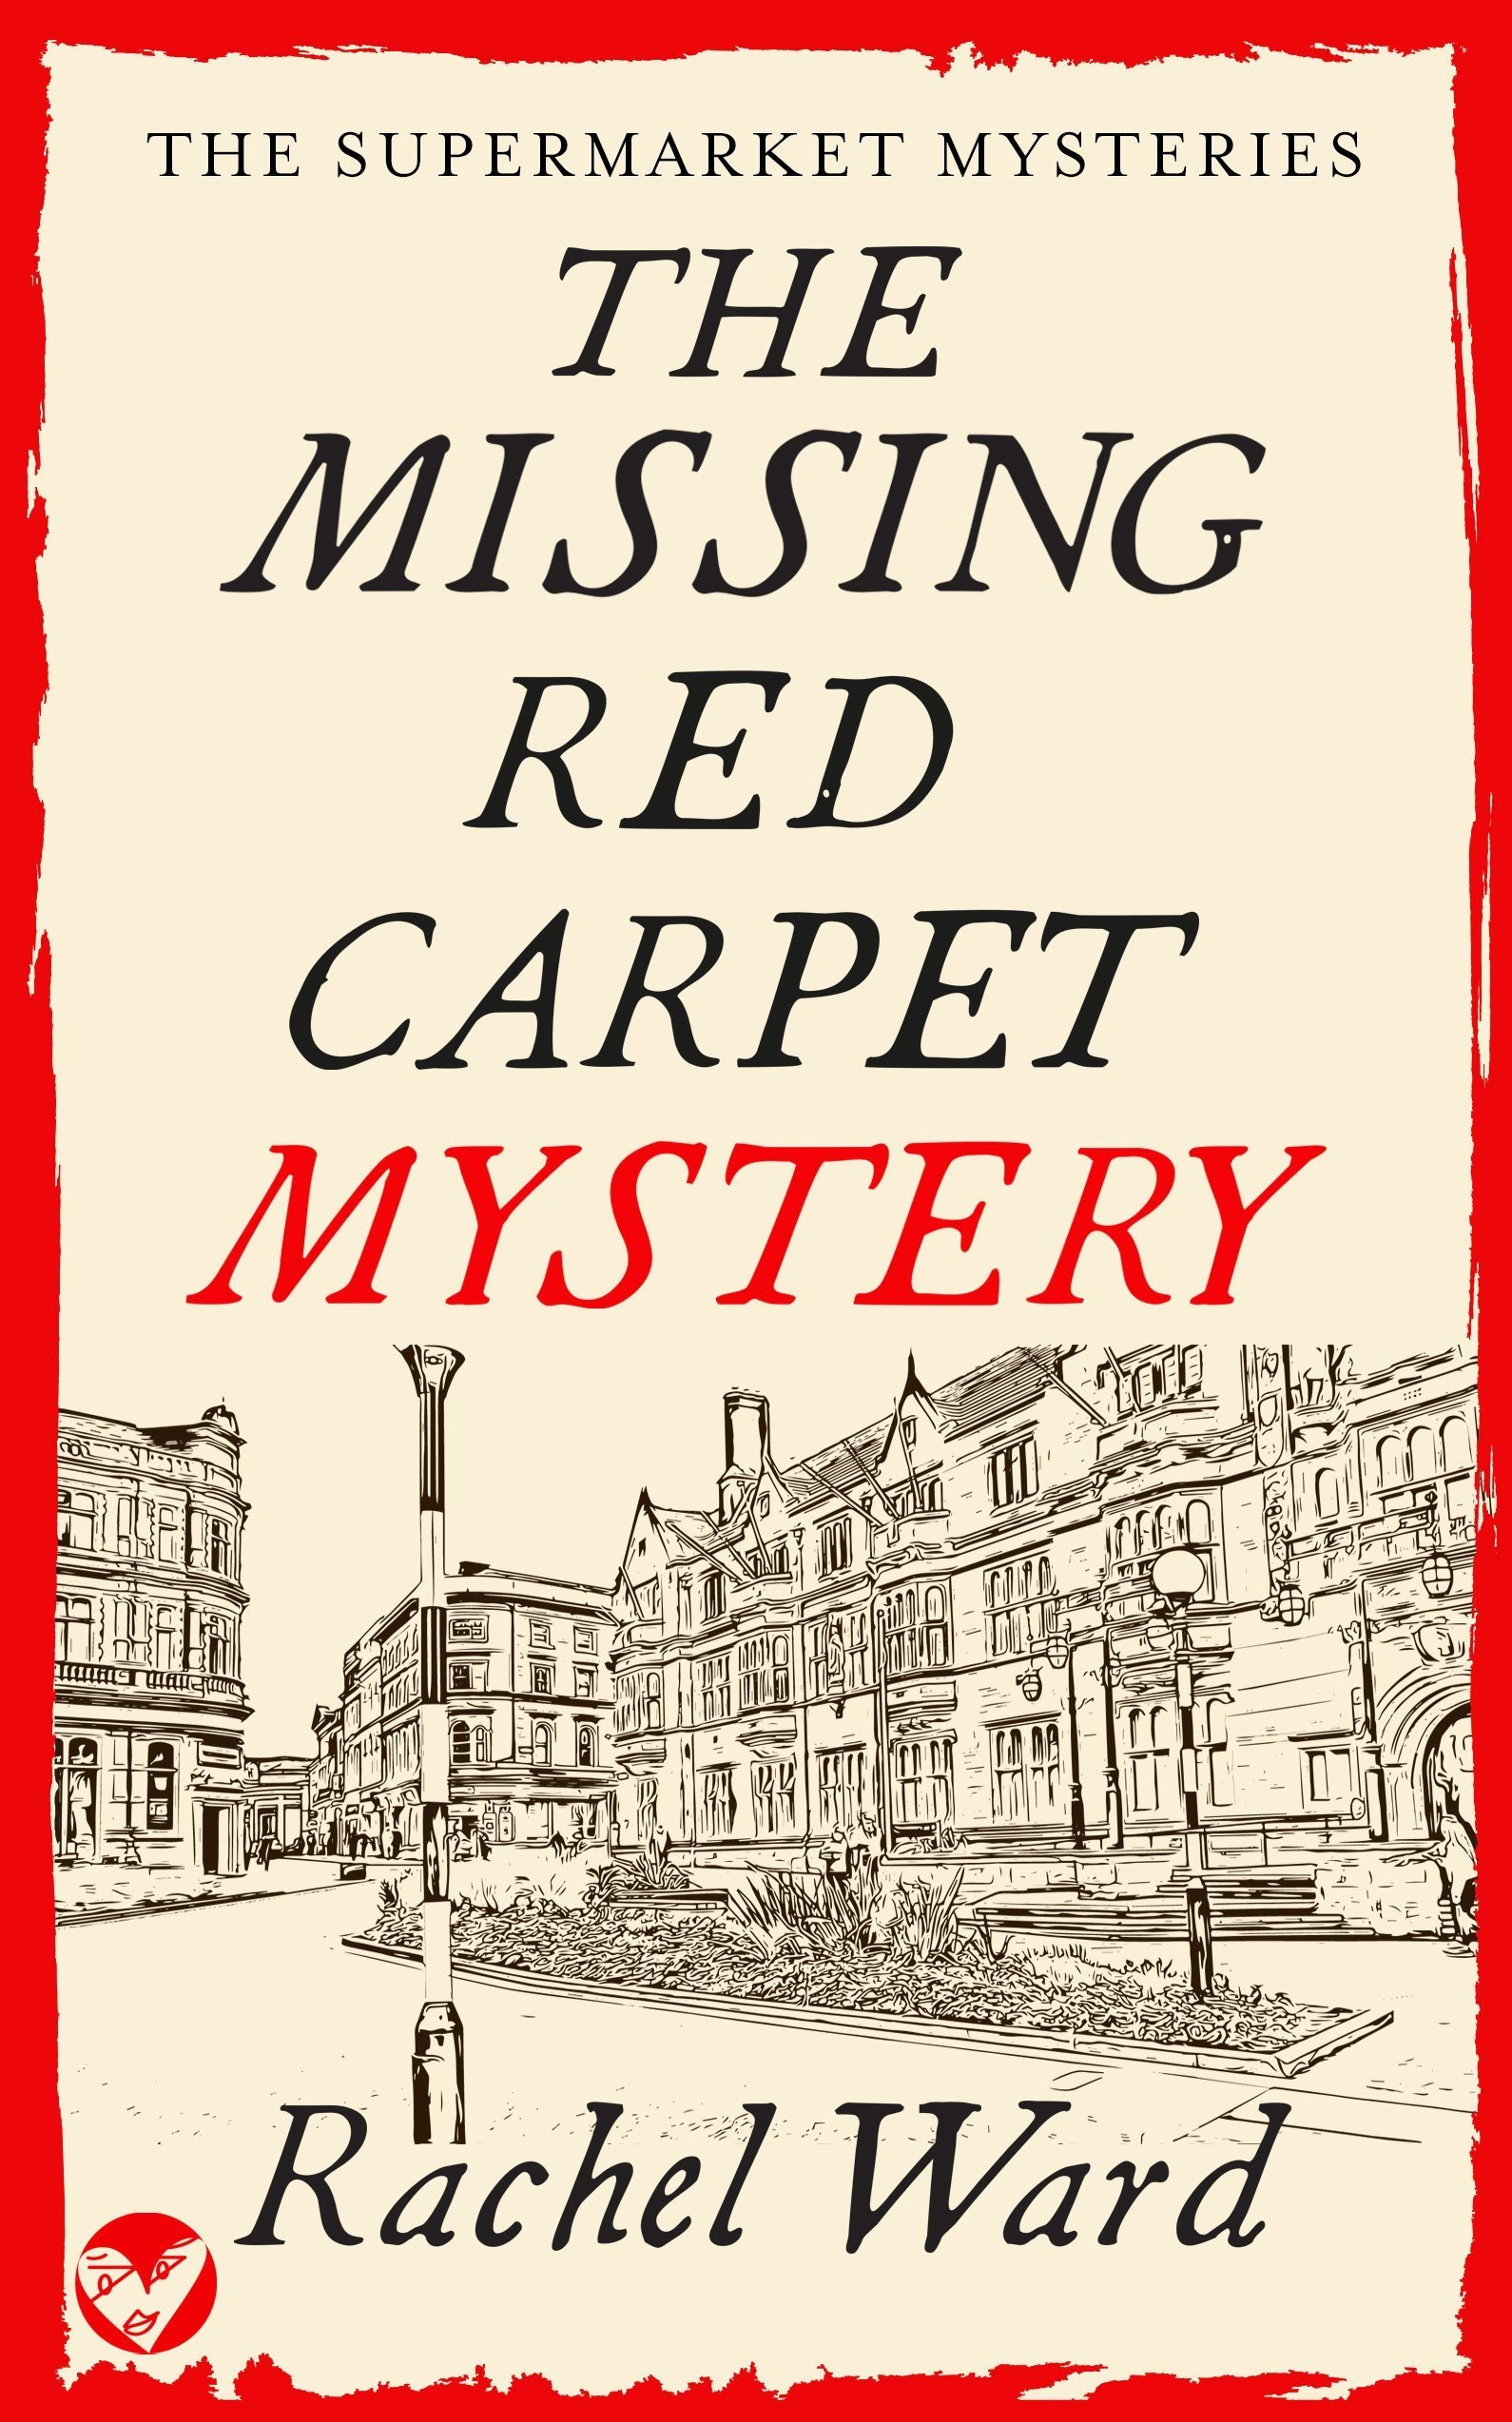 THE+MISSING+RED+CARPET+MYSTERY+Cover+publish+631KB.jpg